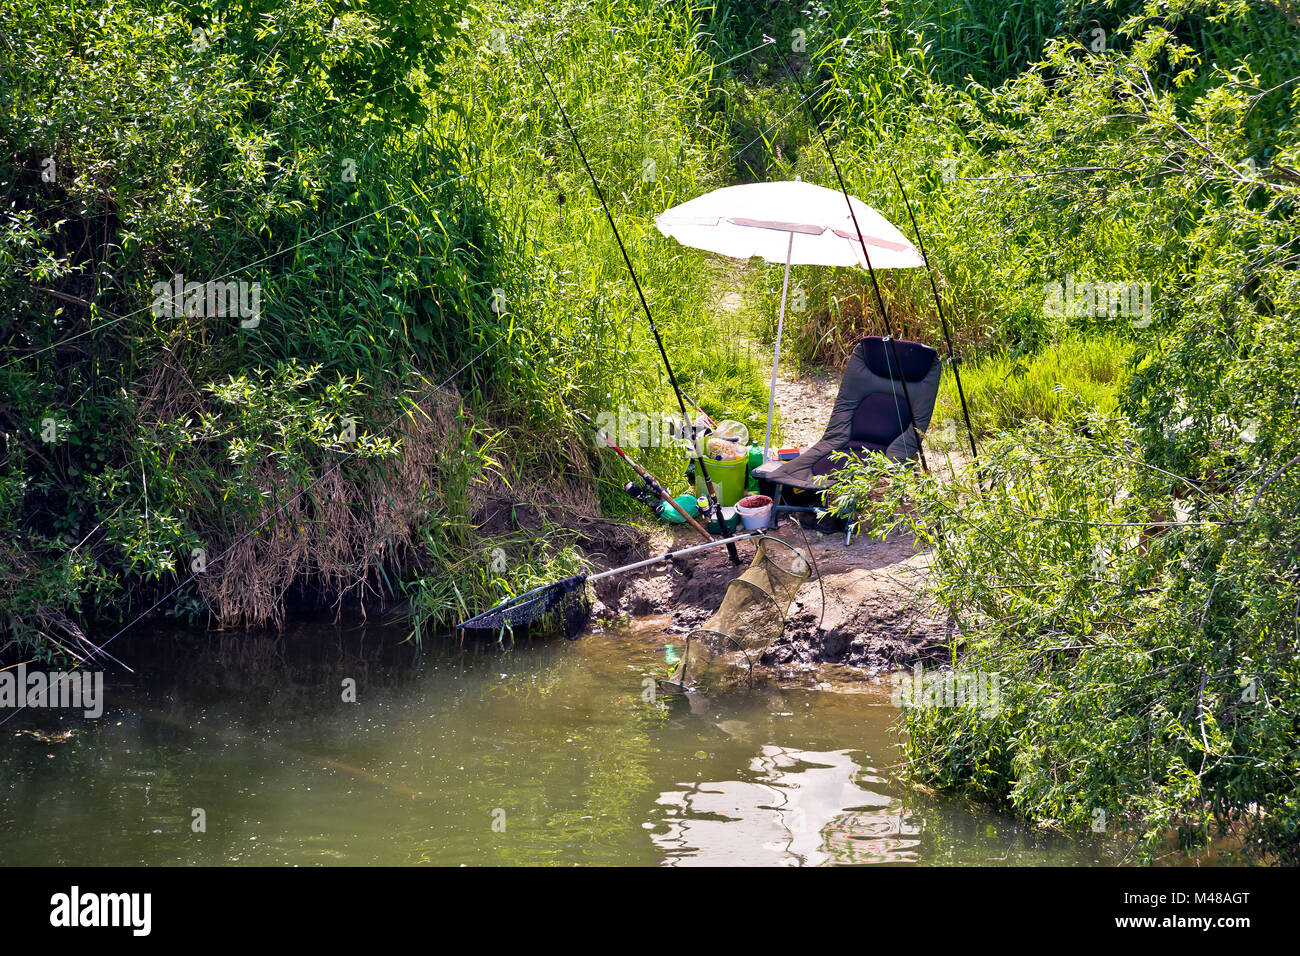 Fishing spot and gear in green landscape Stock Photo